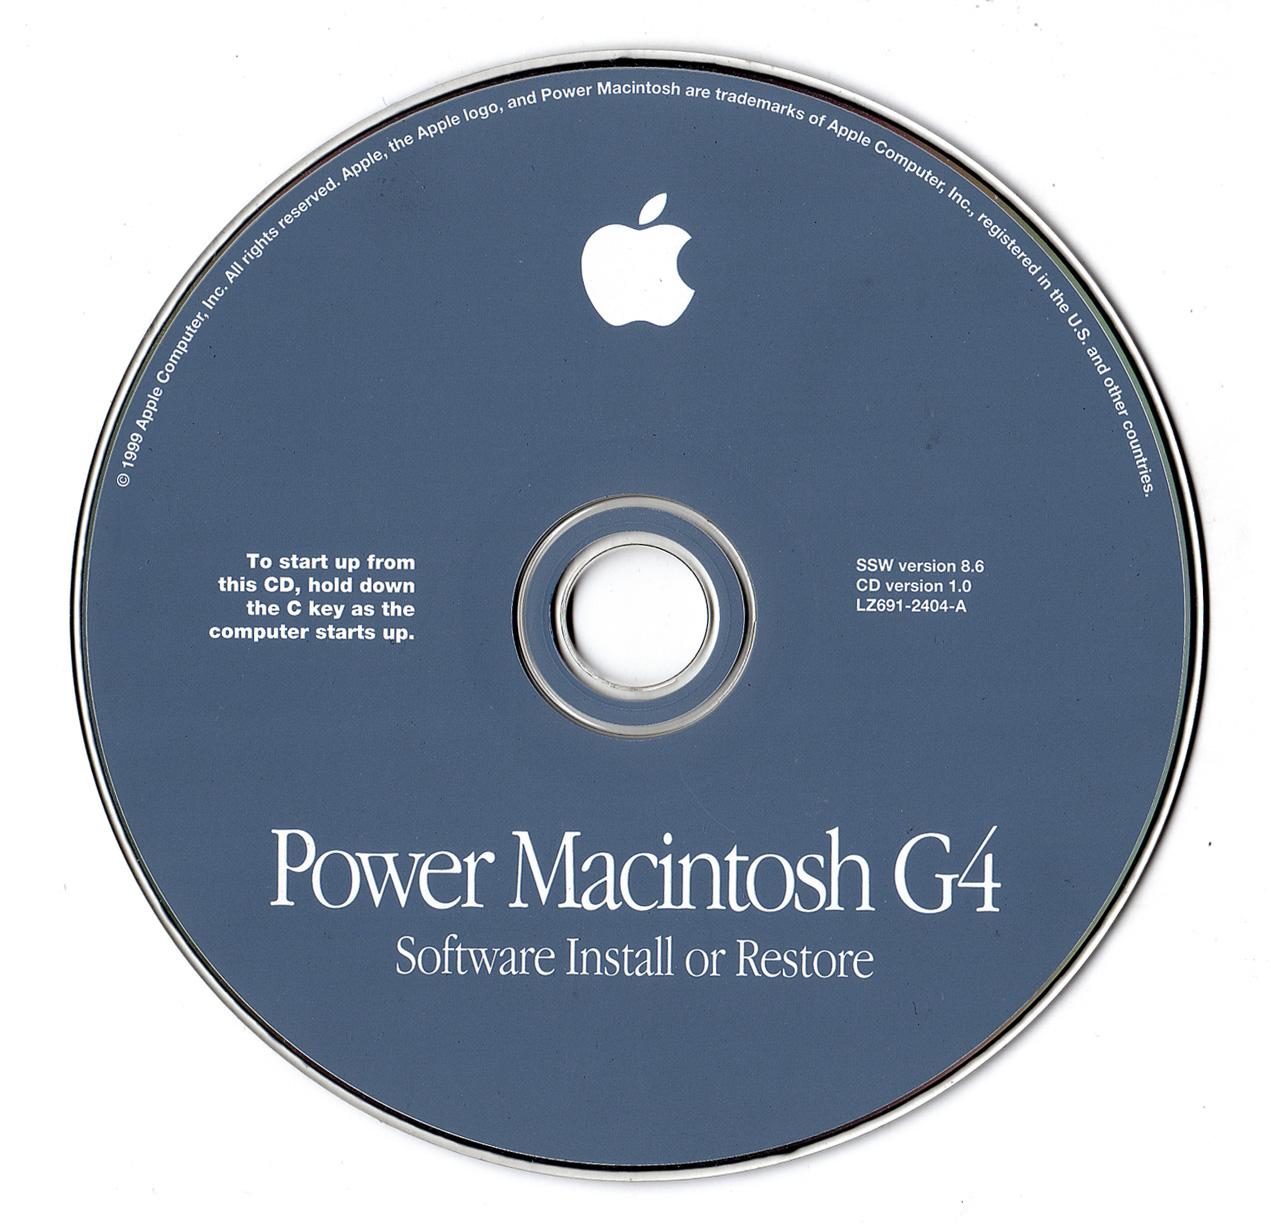 Offer] Some Macintosh software (New: Mac OS Betas) - BetaArchive